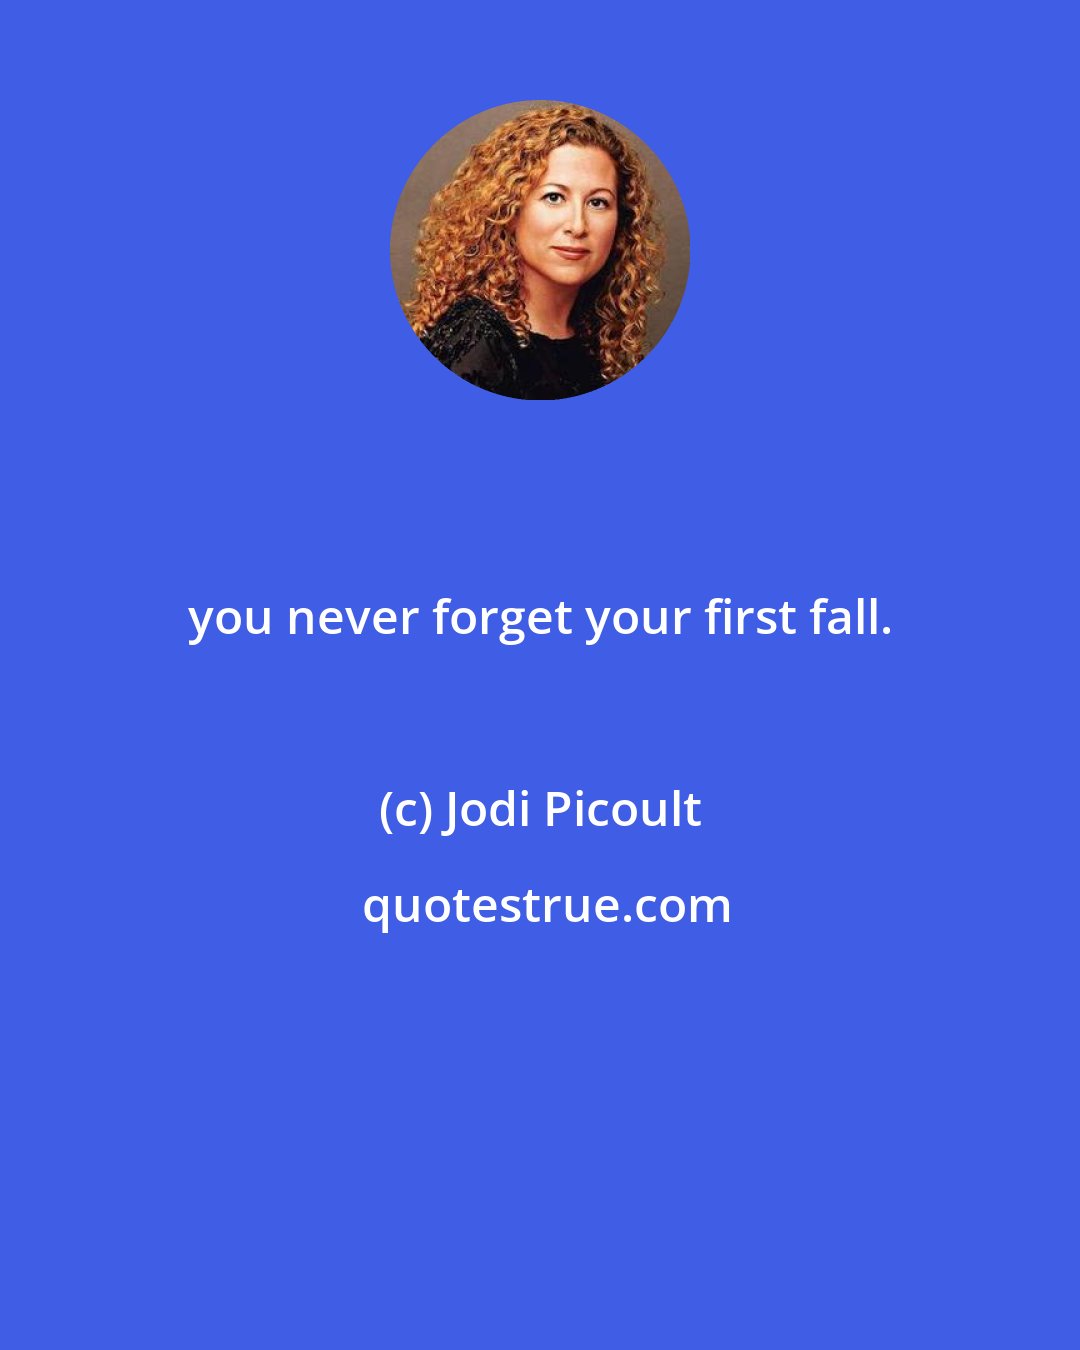 Jodi Picoult: you never forget your first fall.